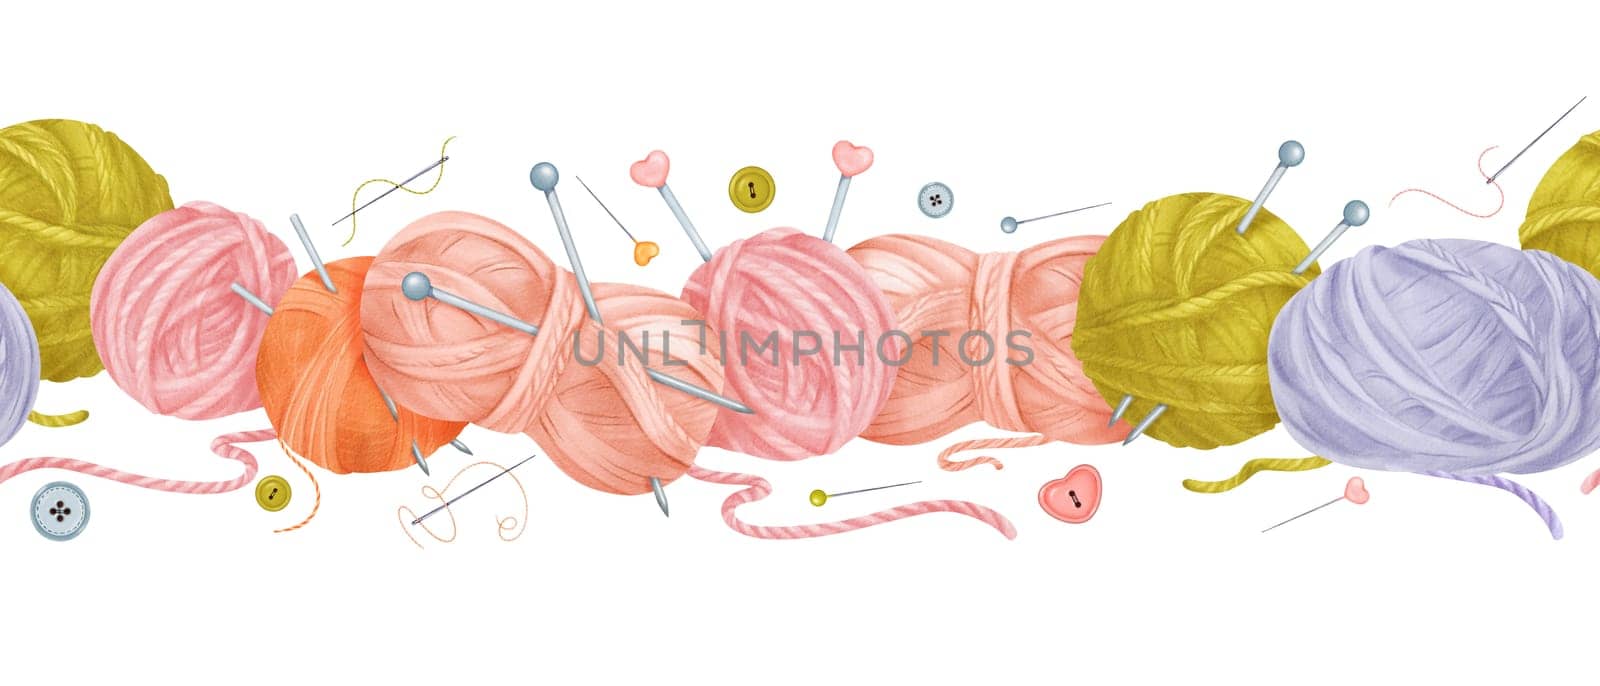 Seamless border featuring wool skeins needles threads buttons cotton flower, knitting needles, and pins. for crafting enthusiasts, knitting websites, or DIY-themed projects. Watercolor illustration. by Art_Mari_Ka